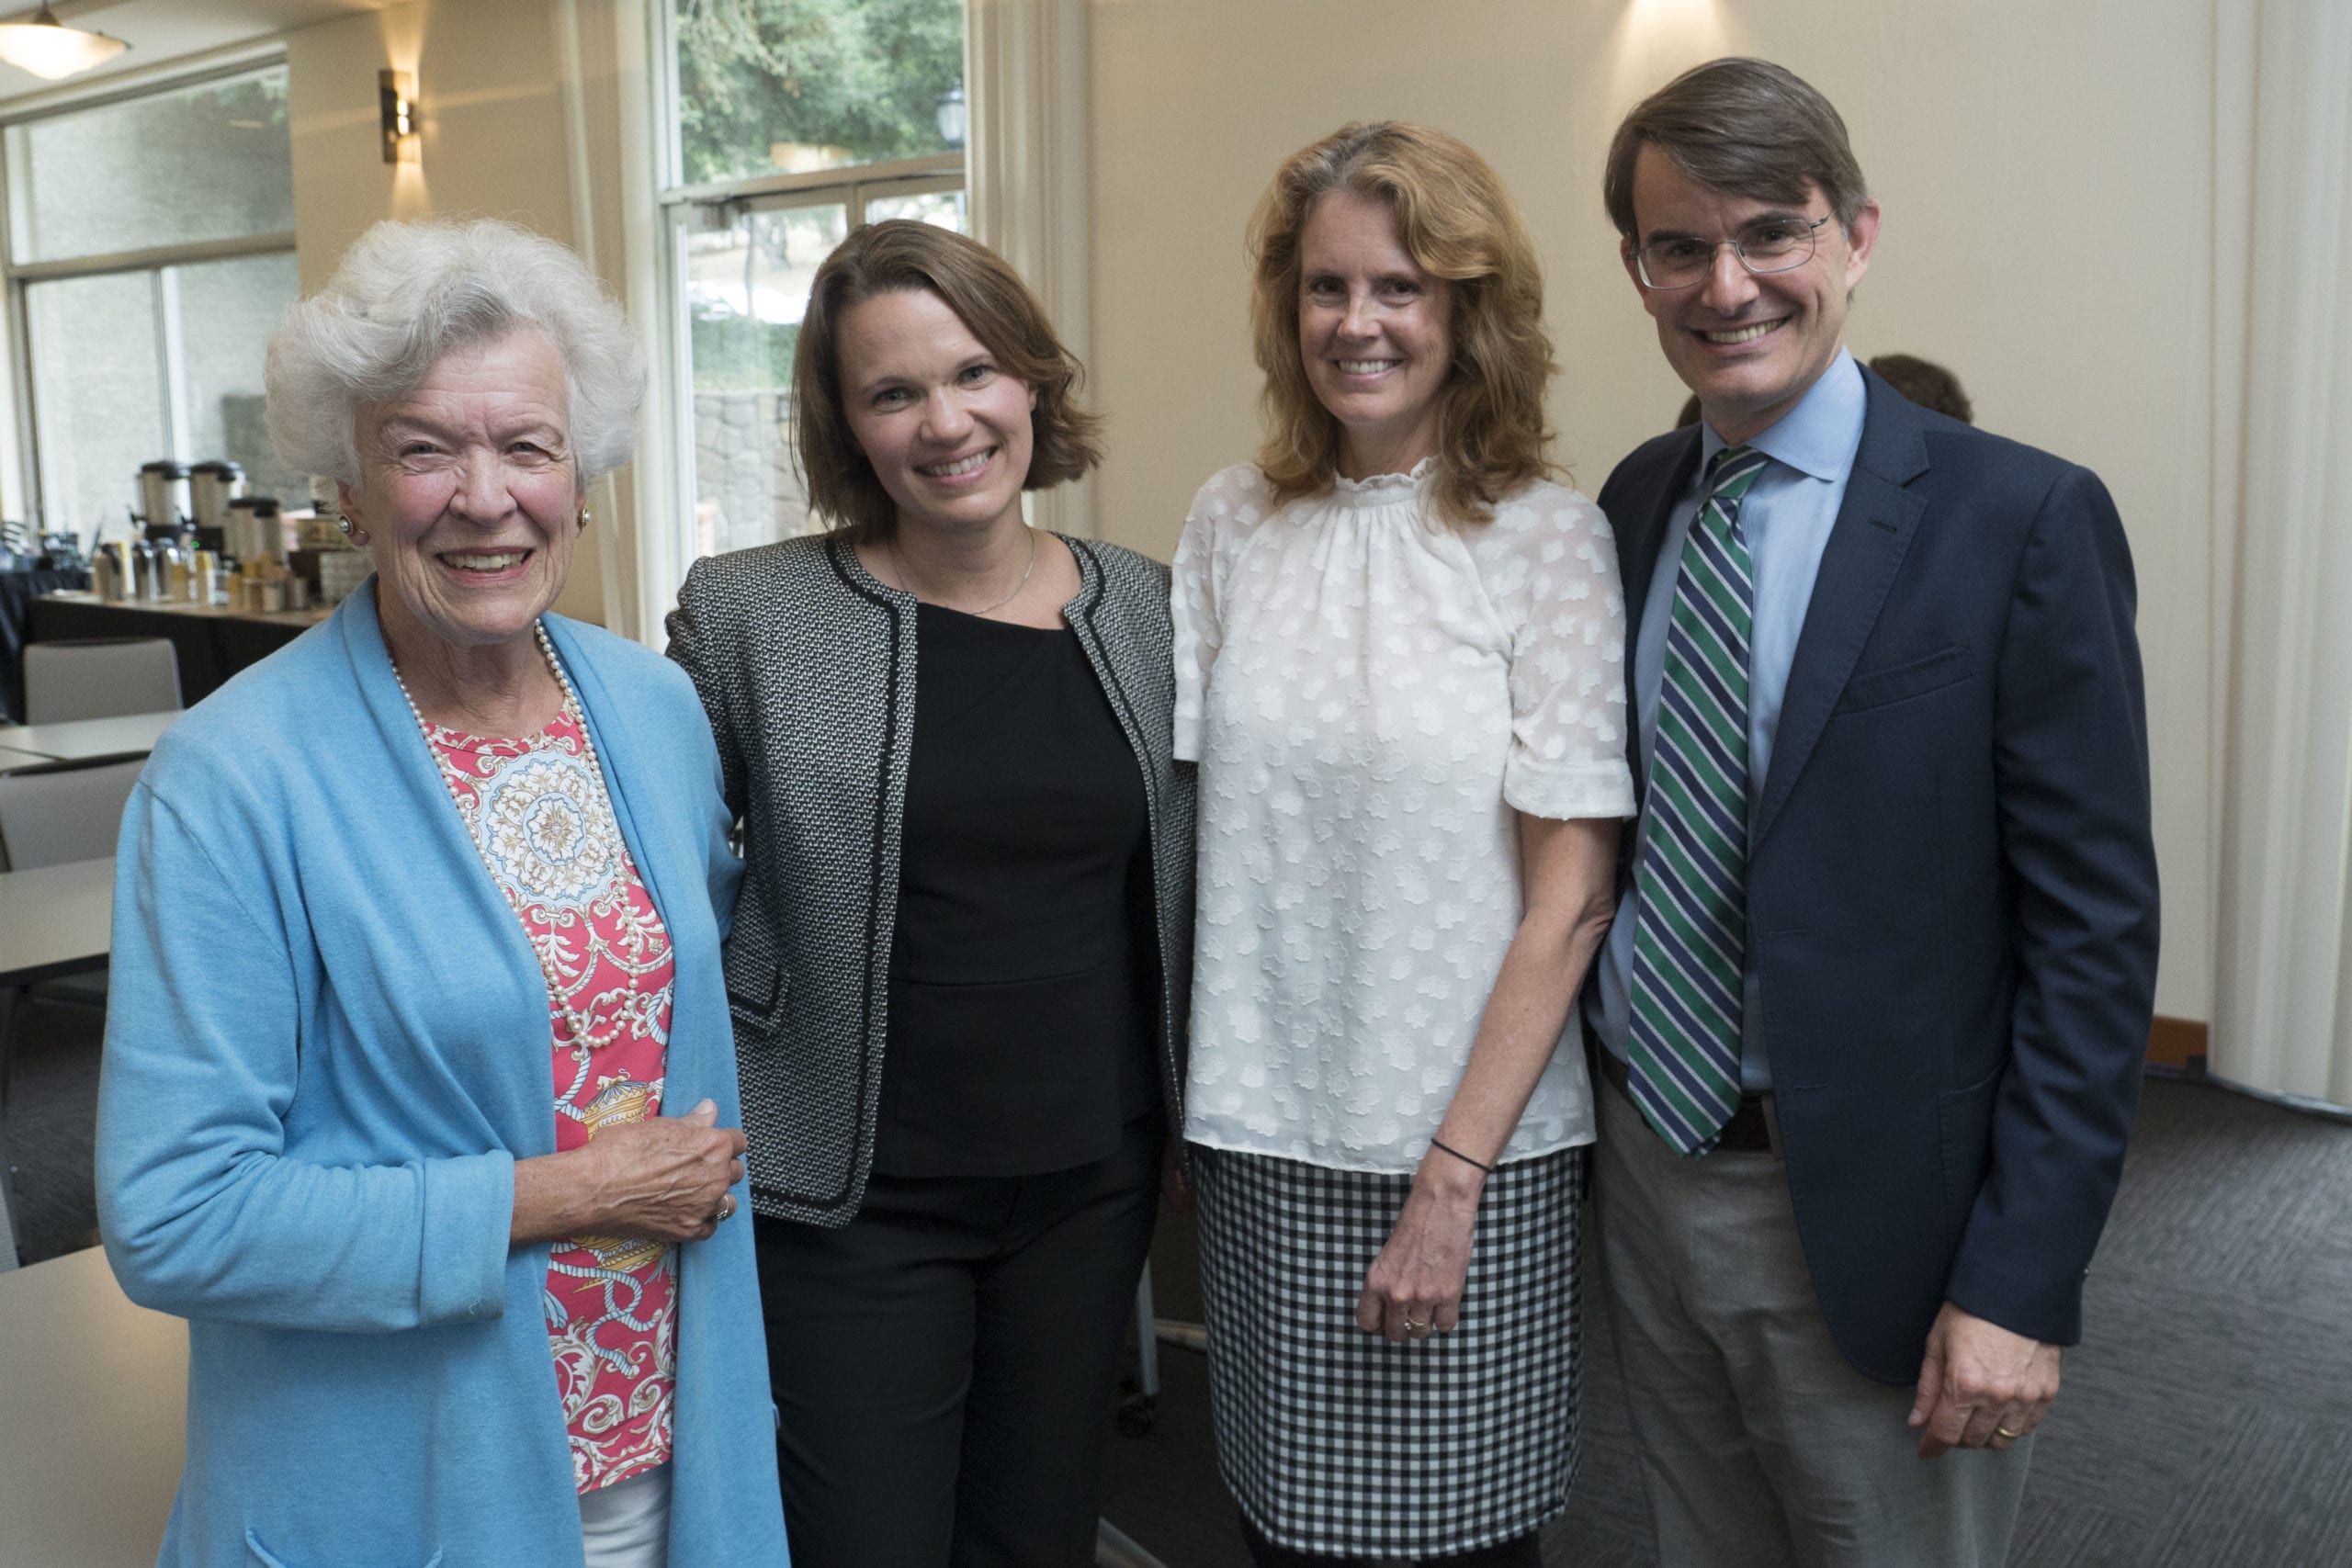 Photograph of Mary Lee Noonan, Abby Wood, Julie Oseid, Peter Stern